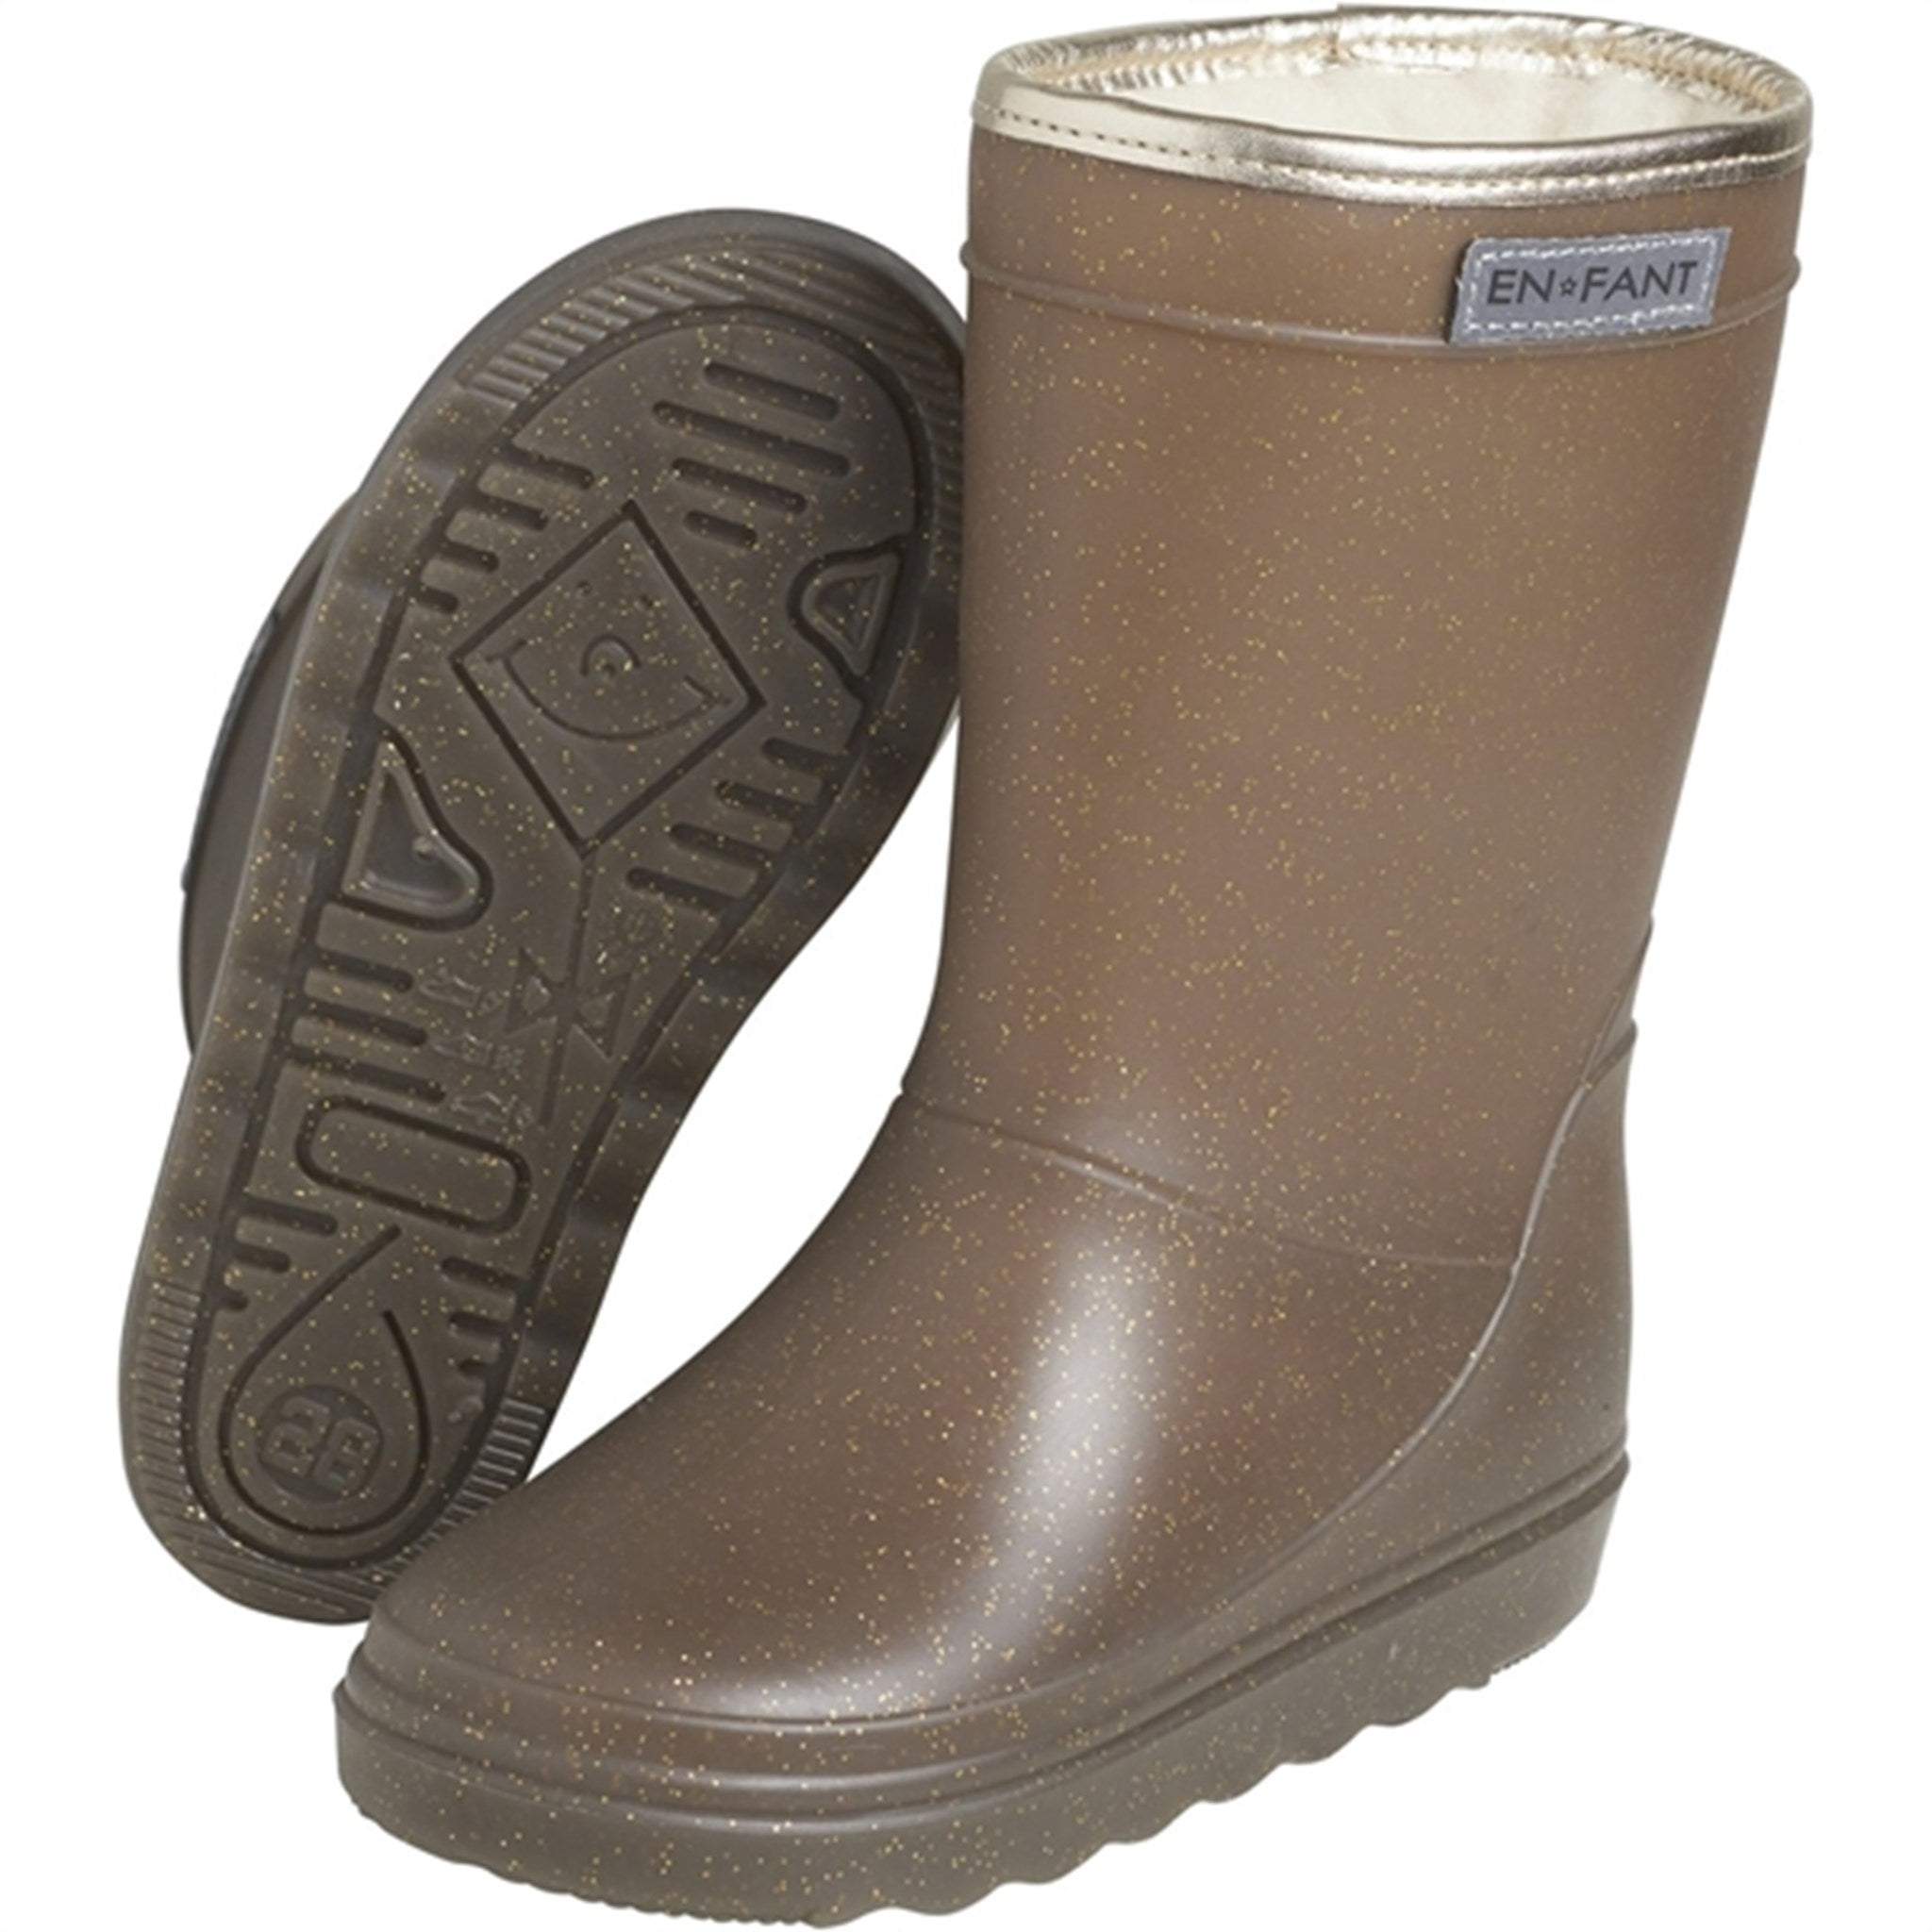 En Fant Thermo Boots Glitter Chocolate Chip 2